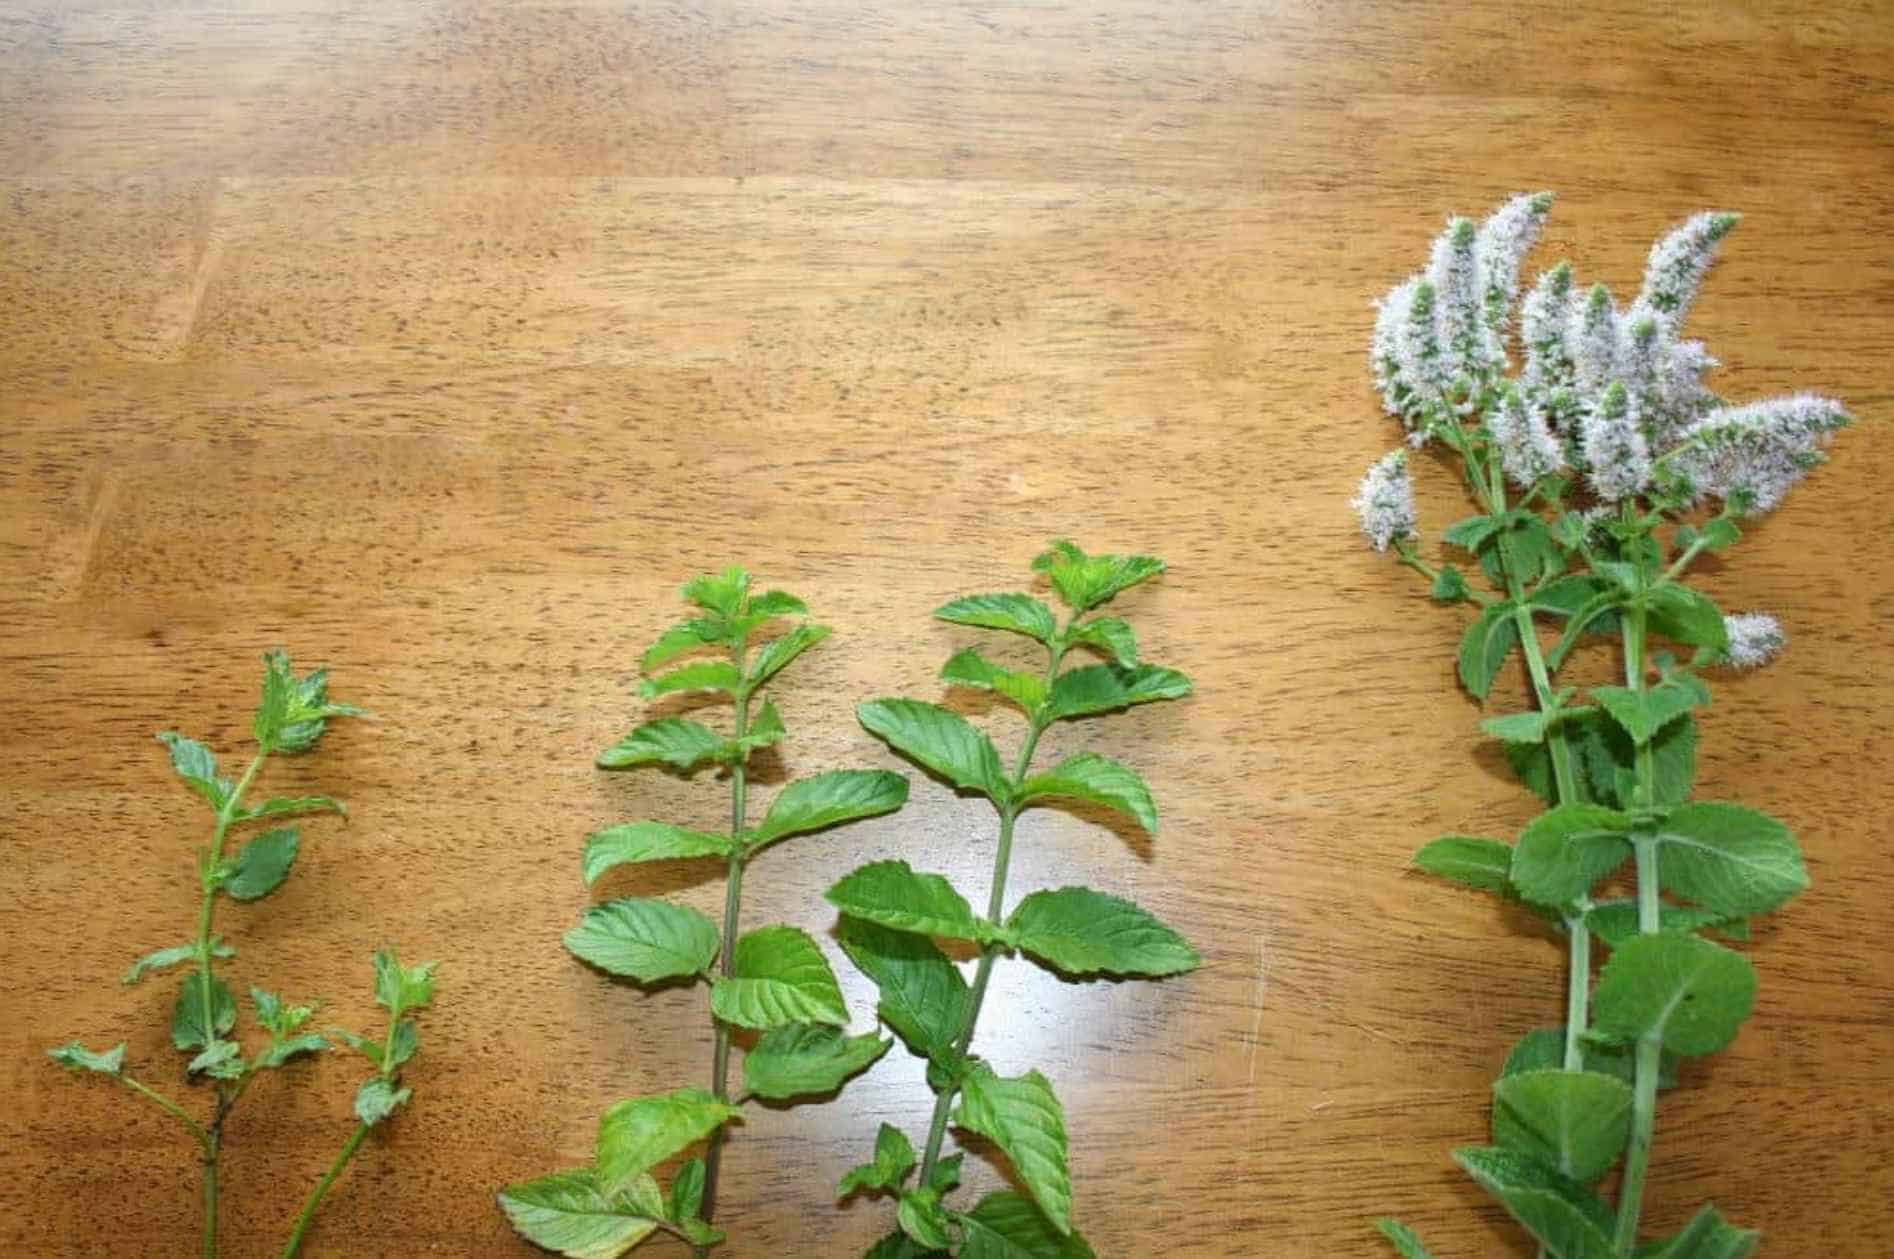 What Types of Mint Can Rabbits Eat